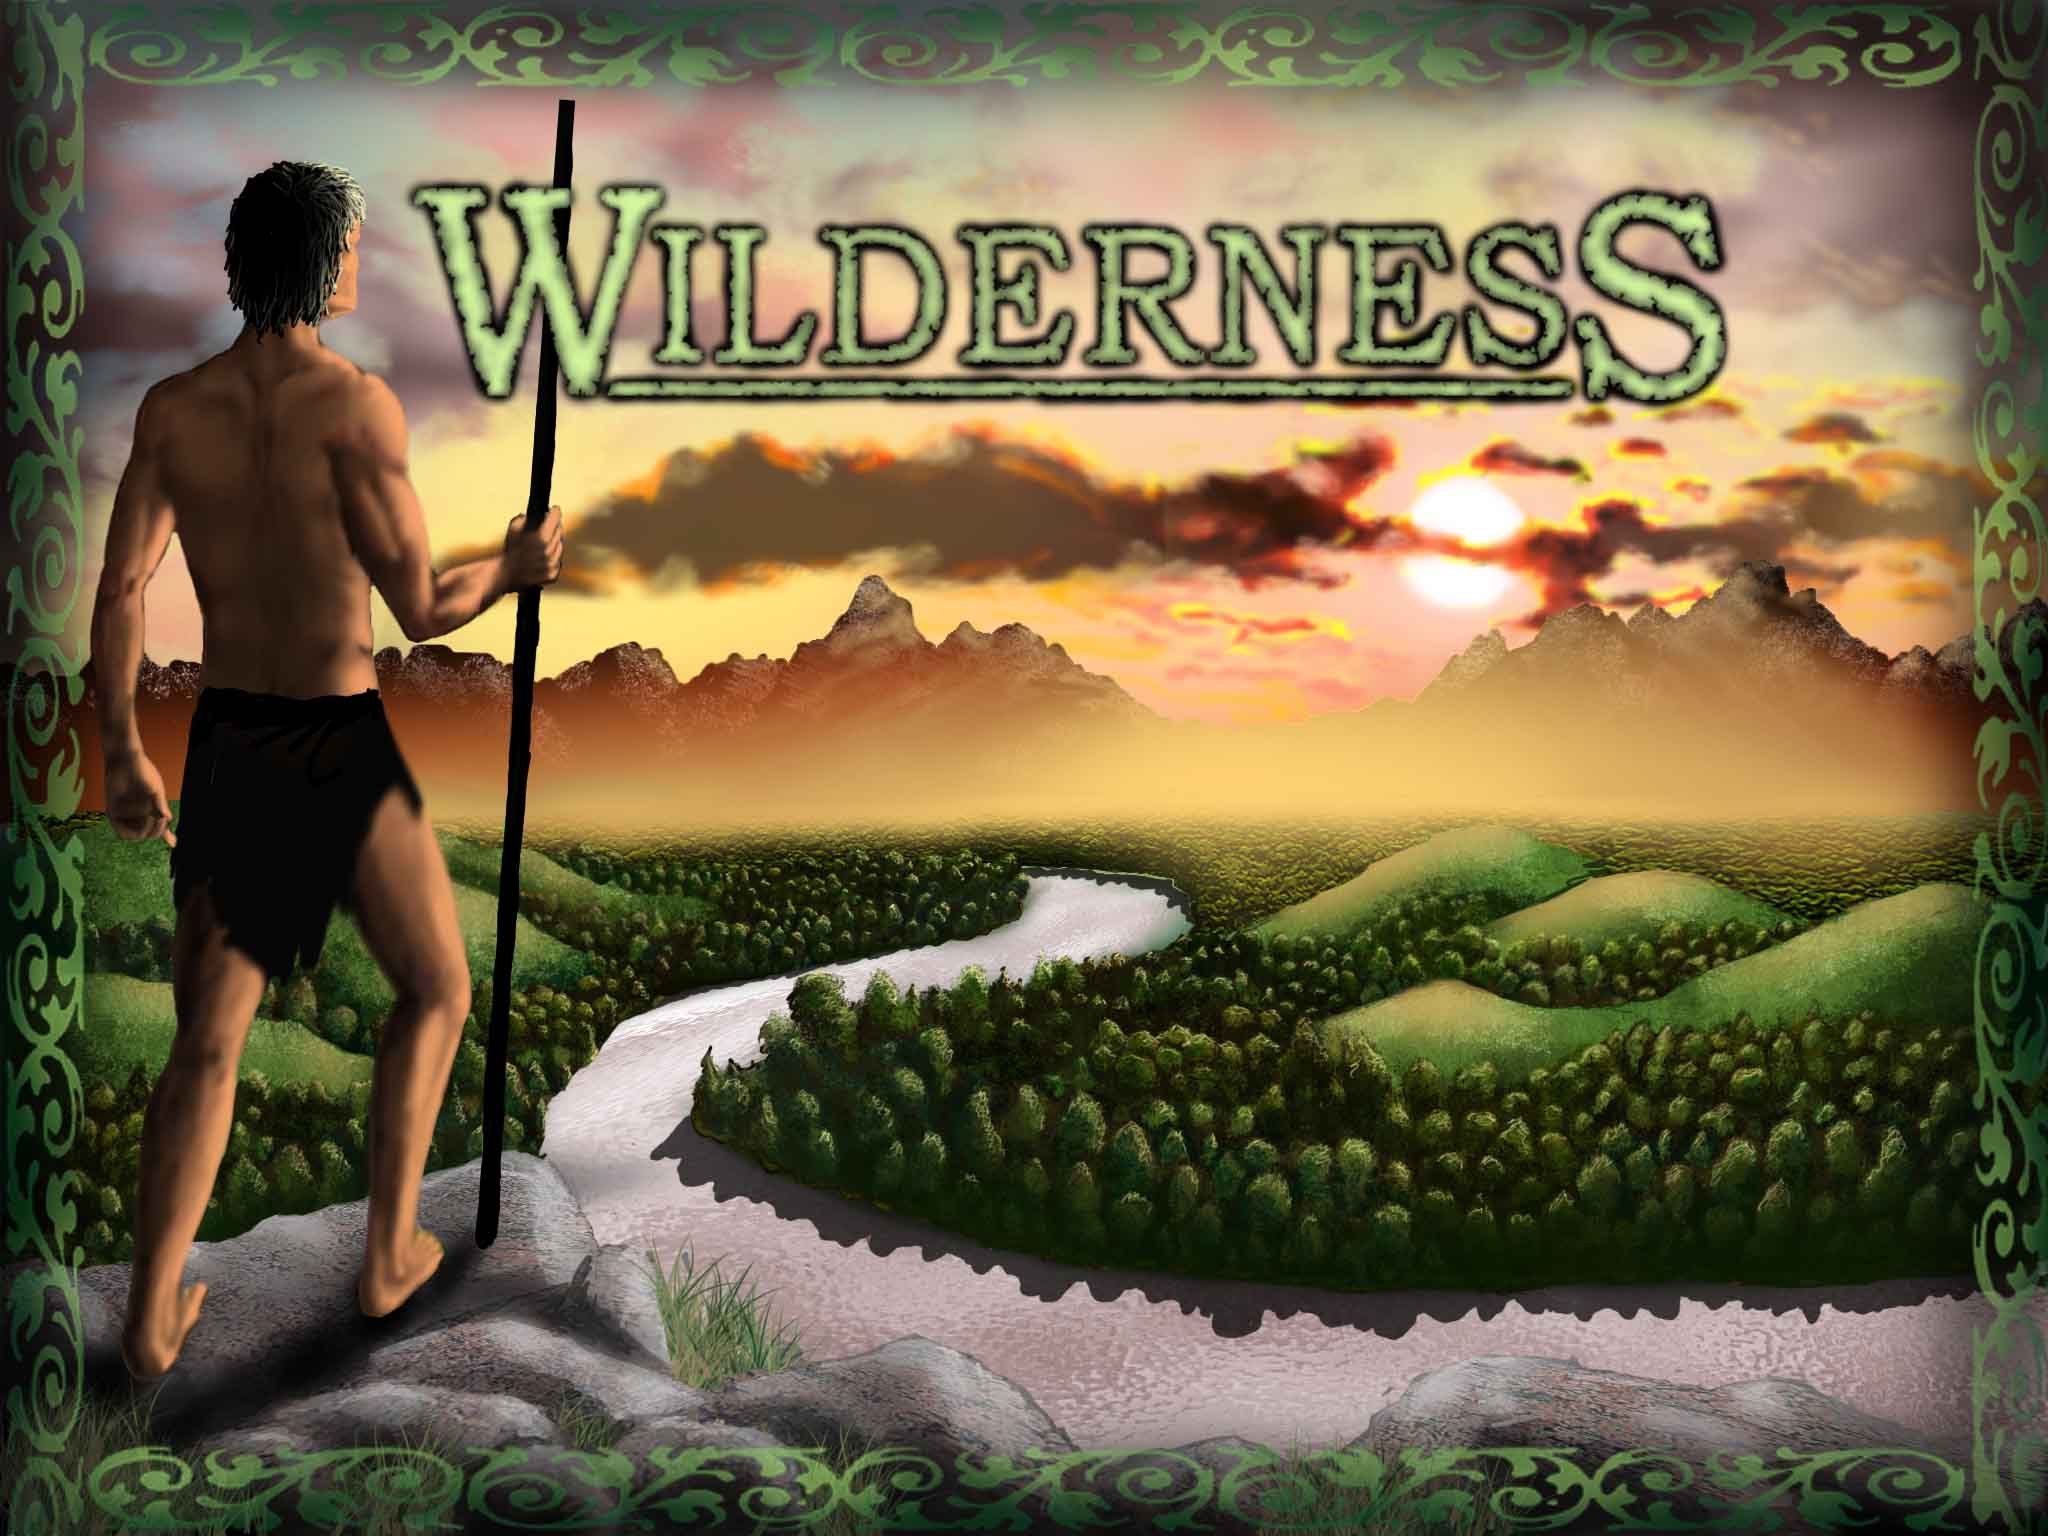 Wilderness: A Game of Survival